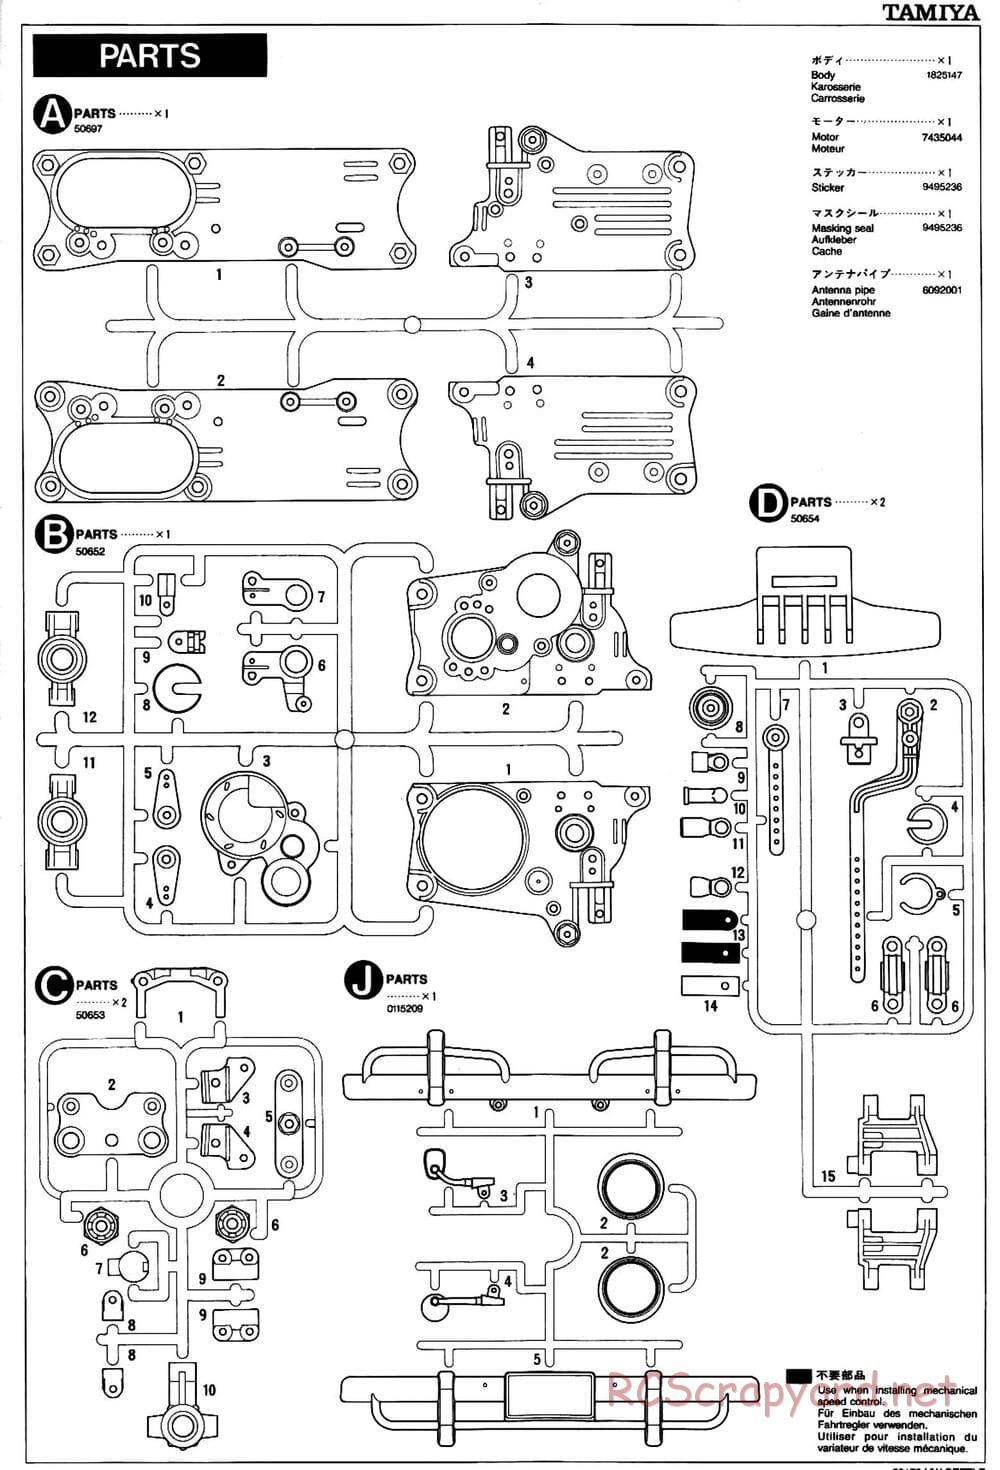 Tamiya - Volkswagen Beetle - M02L Chassis - Manual - Page 21